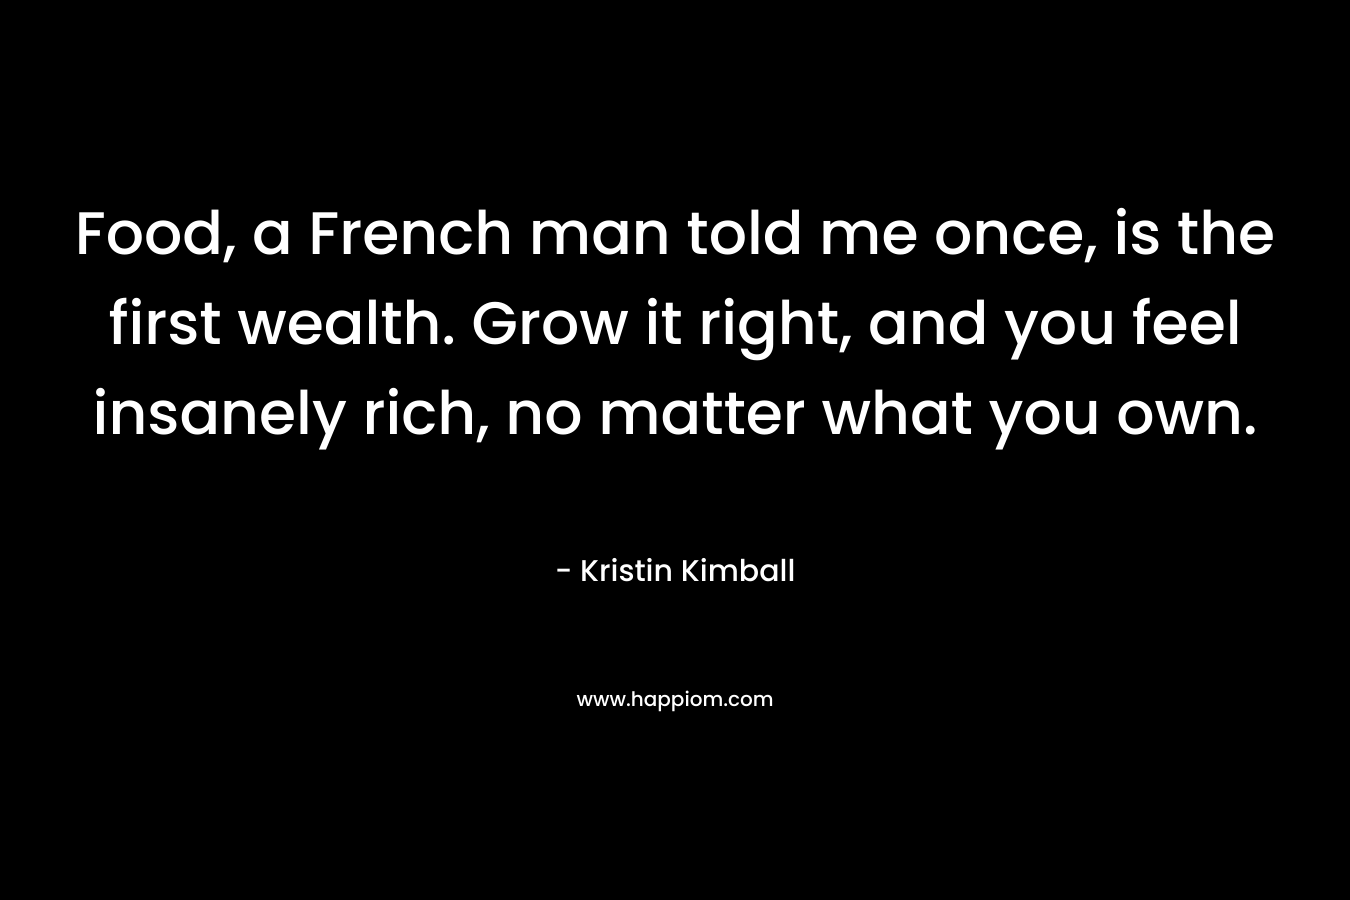 Food, a French man told me once, is the first wealth. Grow it right, and you feel insanely rich, no matter what you own.